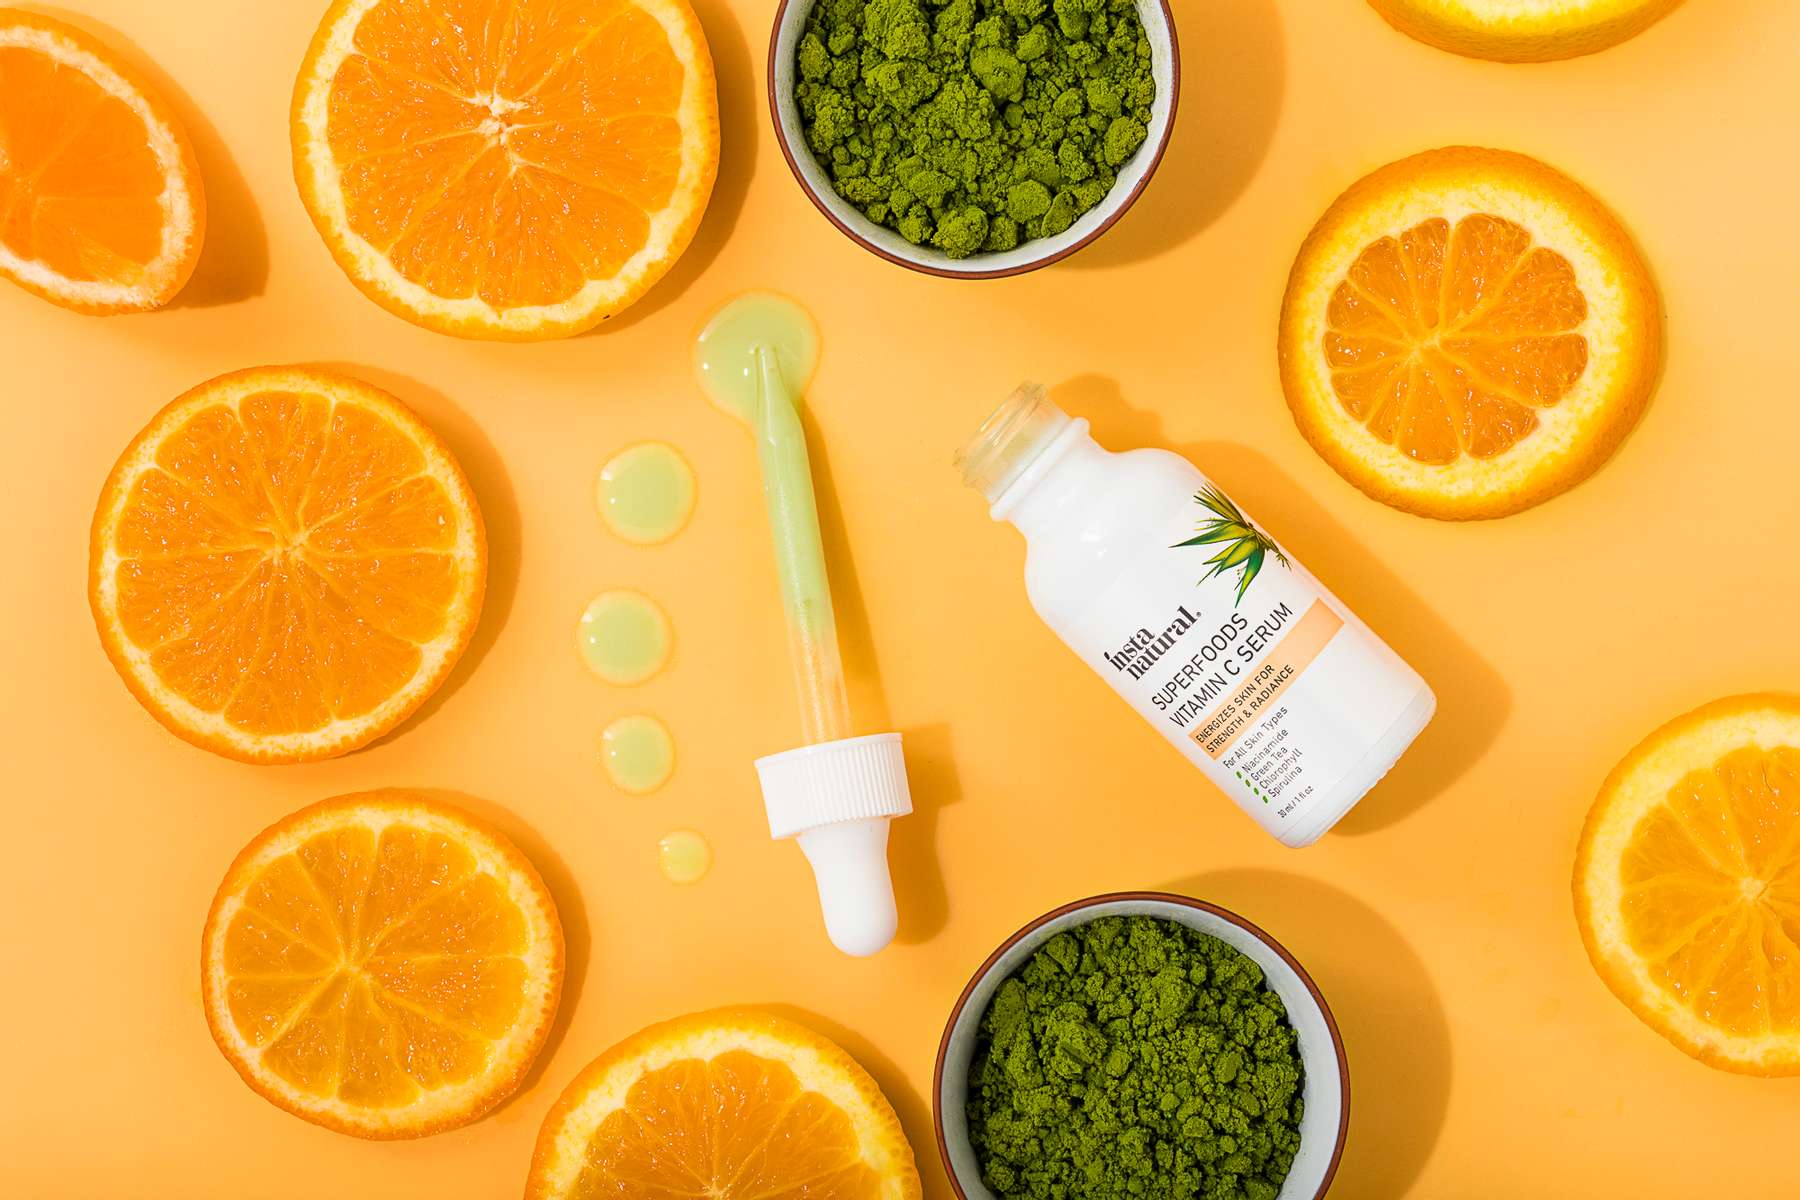 Oranges and spirulina on an orange background for Instanatural Skin Care, by JAM Creative.